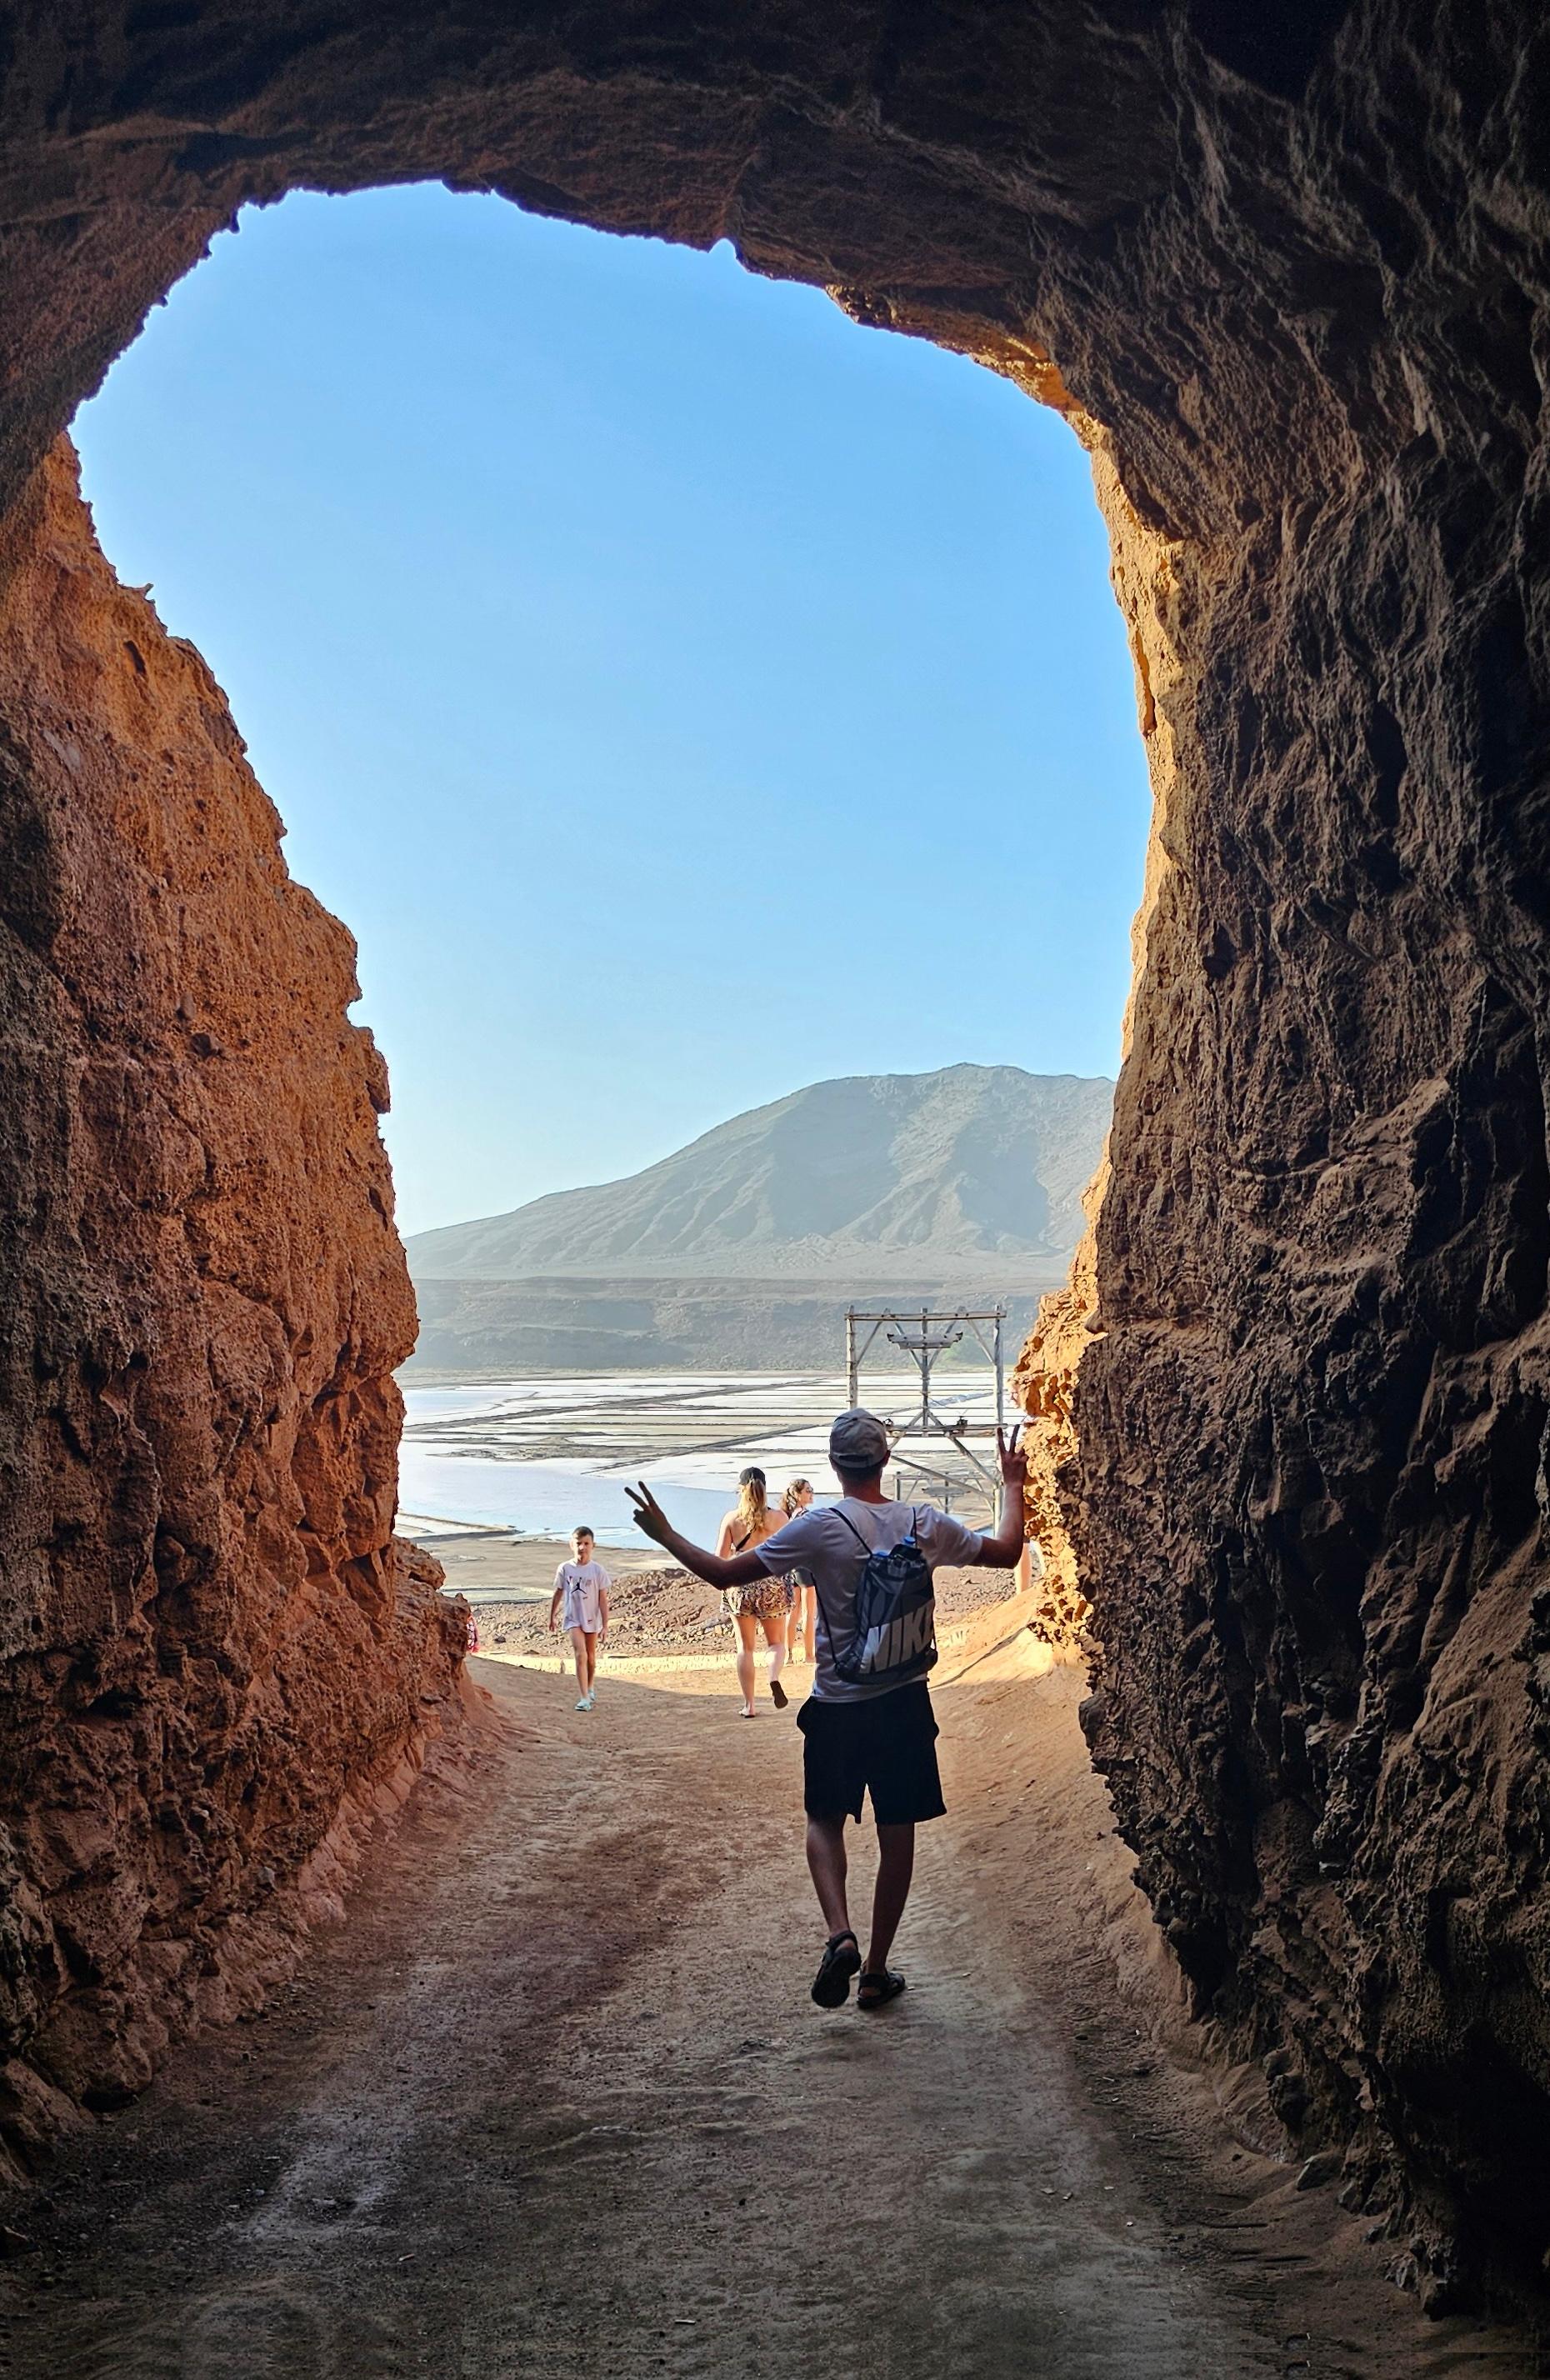 A person standing in a cave entrance with arms outstretched towards a beach and mountains in the background.